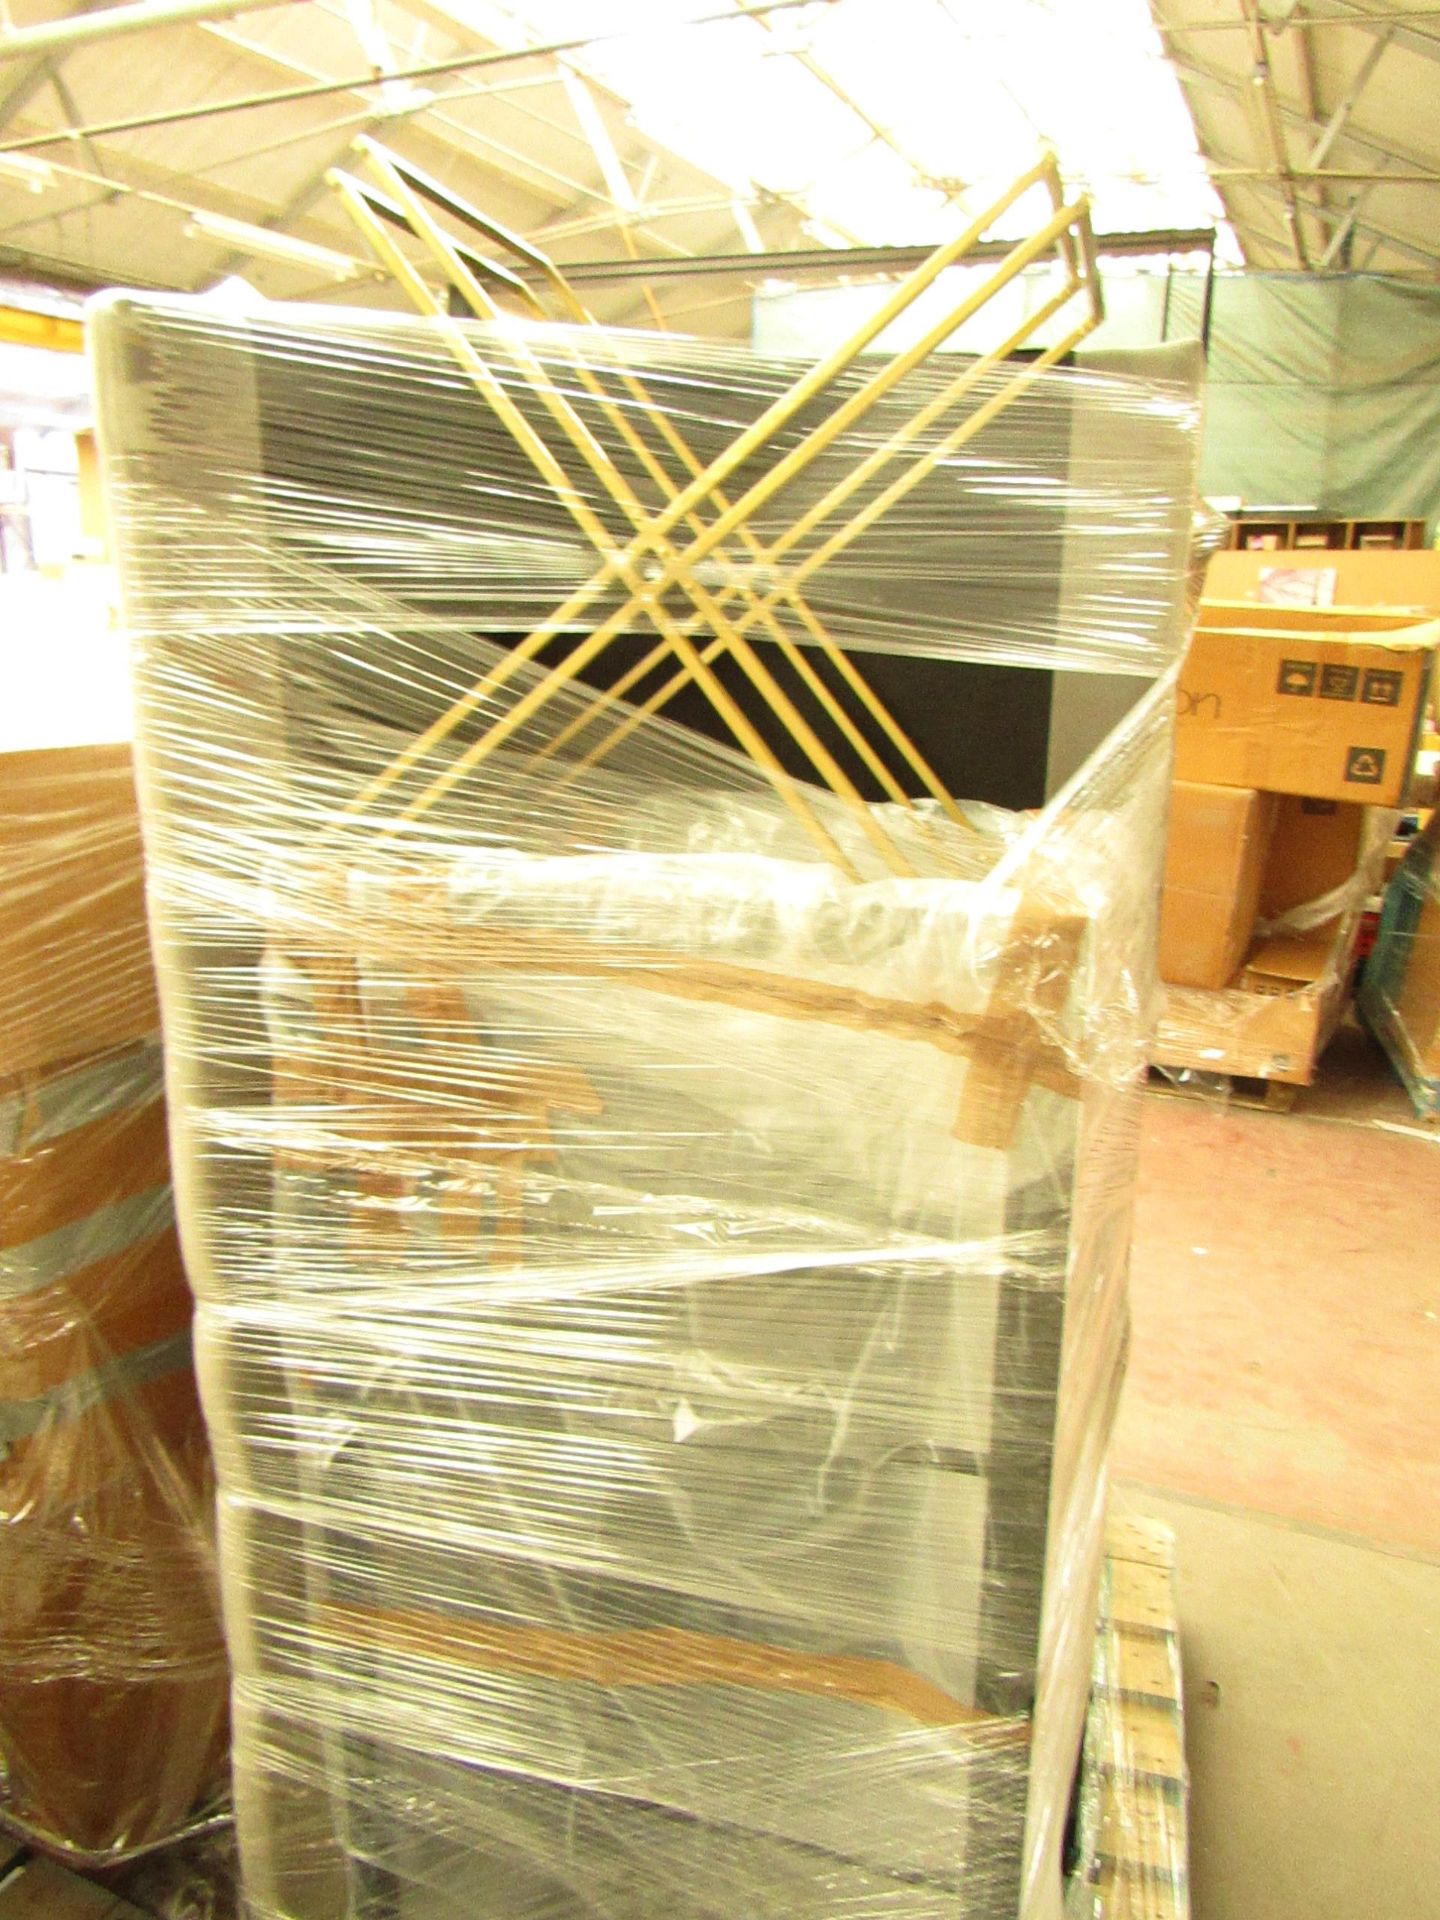 | 1X | PALLET OF SWOON B.E.R FURNITURE, UNMANIFESTED, TYPICAL ITEMS INCLUDE SIDE BOARDS AND MEDIA - Image 2 of 2